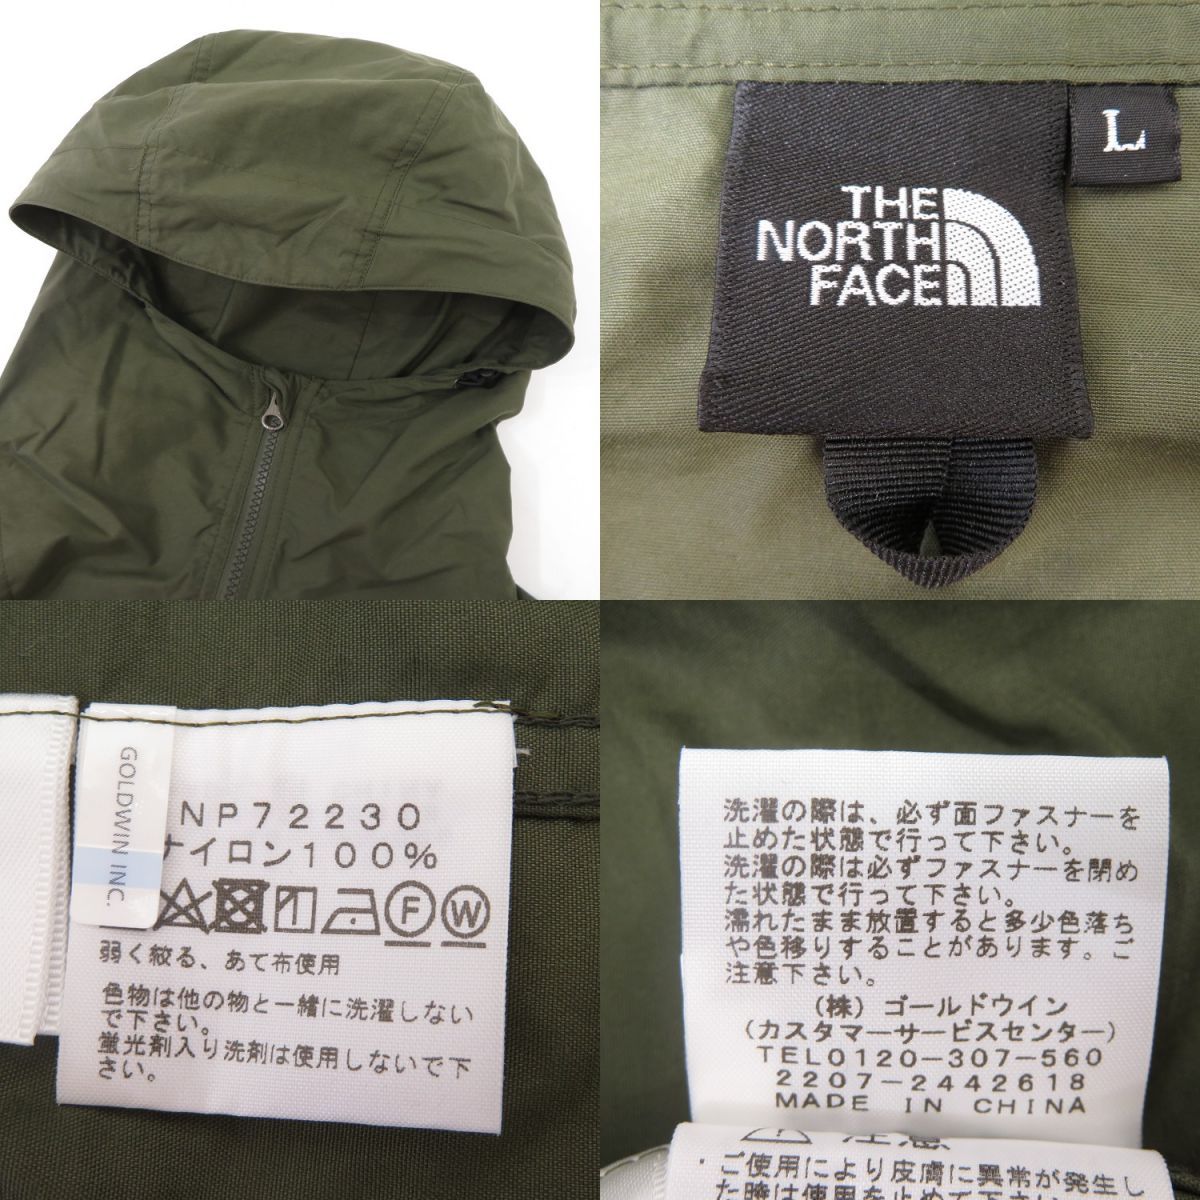 THE NORTH FACE ノースフェイス COMPACT JACKET コンパクトジャケット